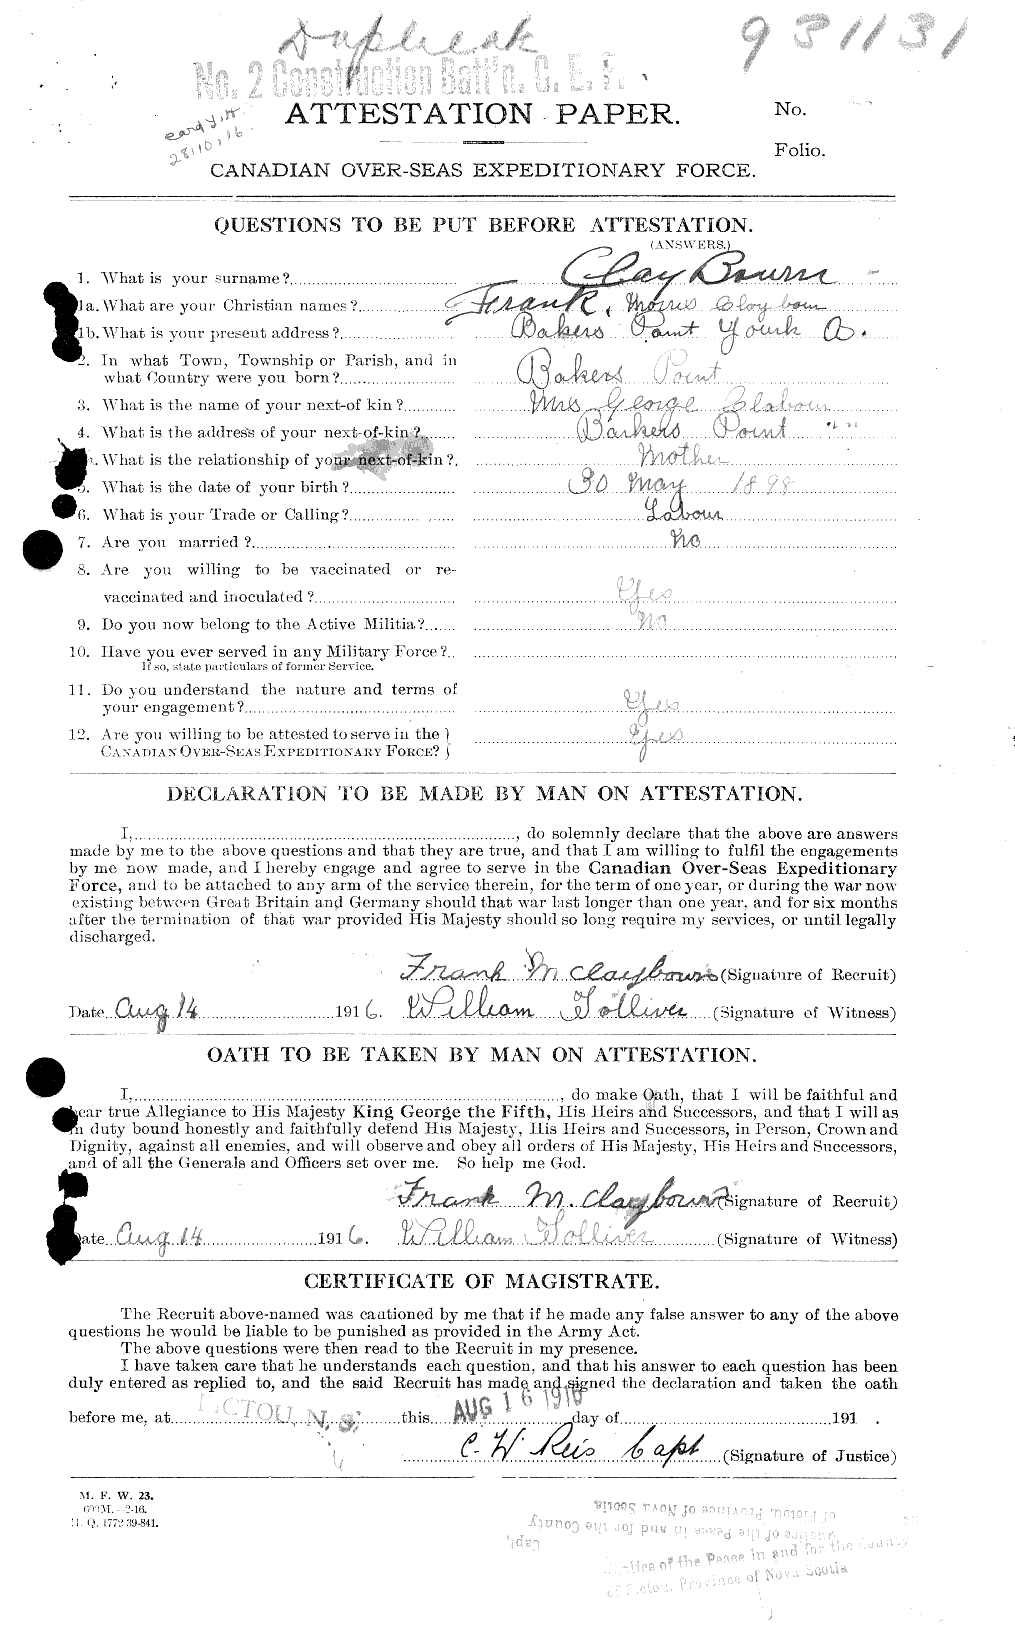 Personnel Records of the First World War - CEF 019226a